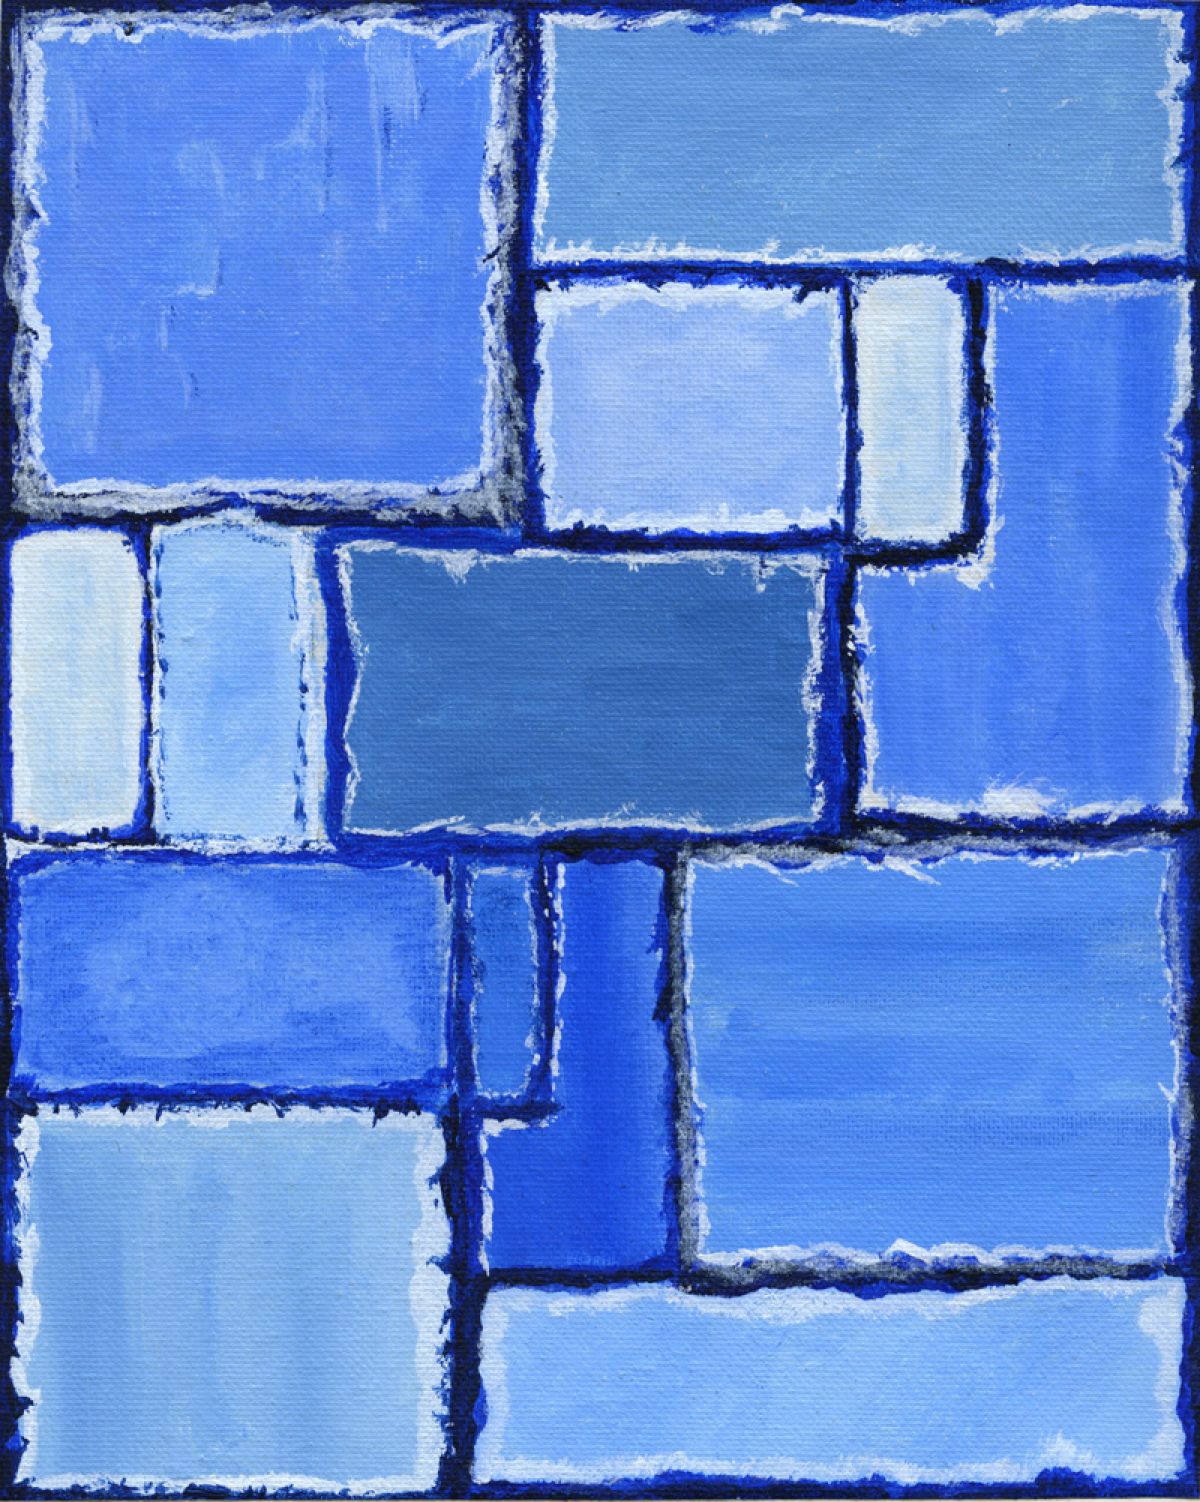 2012, Acrylic on Canvas Paper, 9 7/8 x 7 7/8 in.